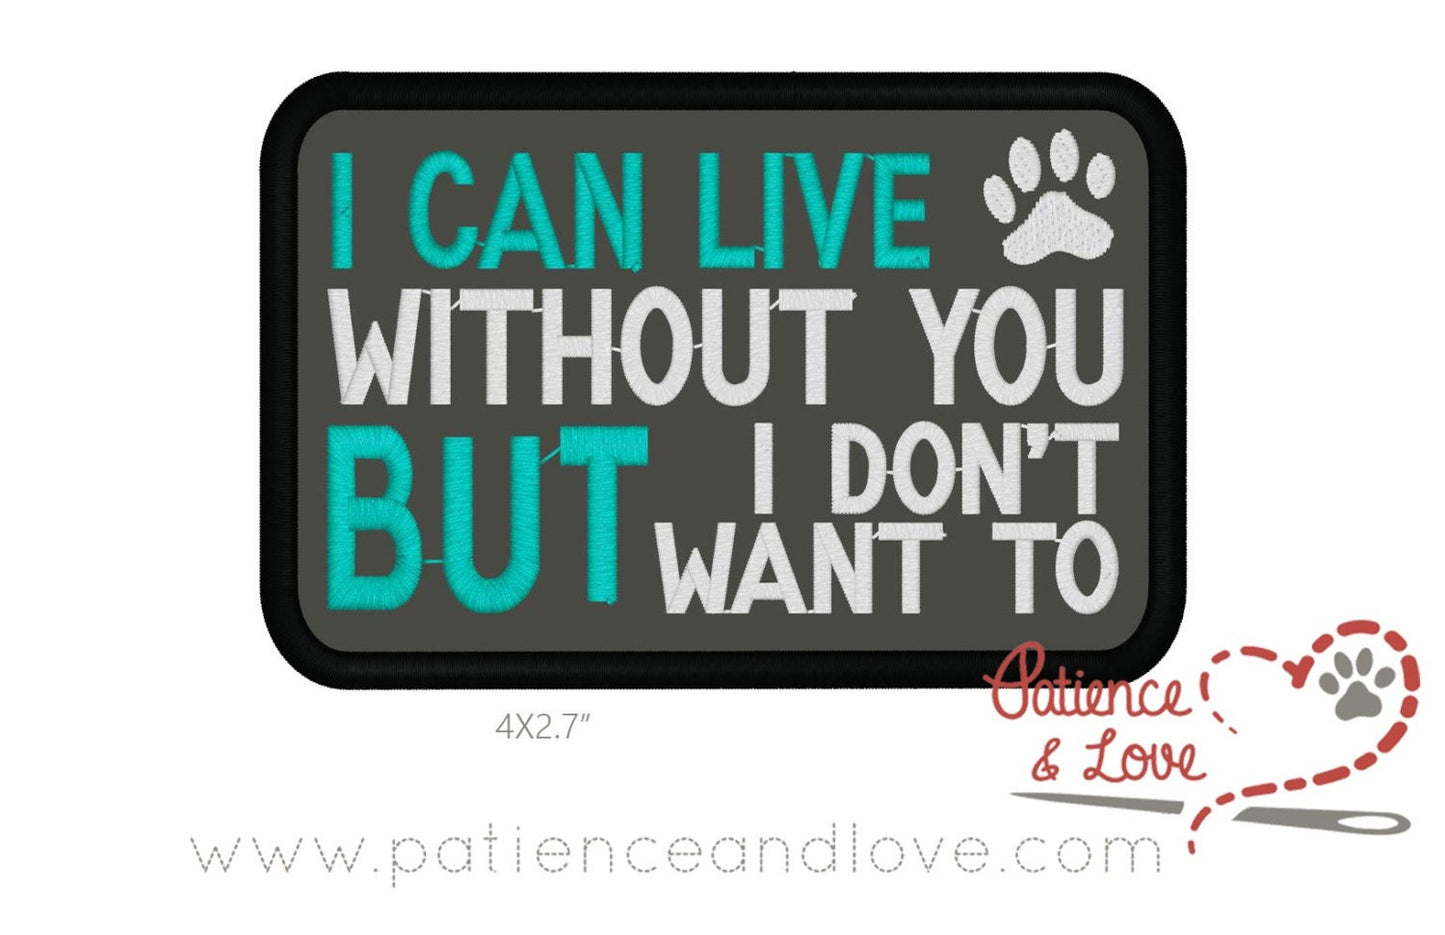 I can live without you but I don't want to, with paw, 4 x 2.7 inch rectangular patch